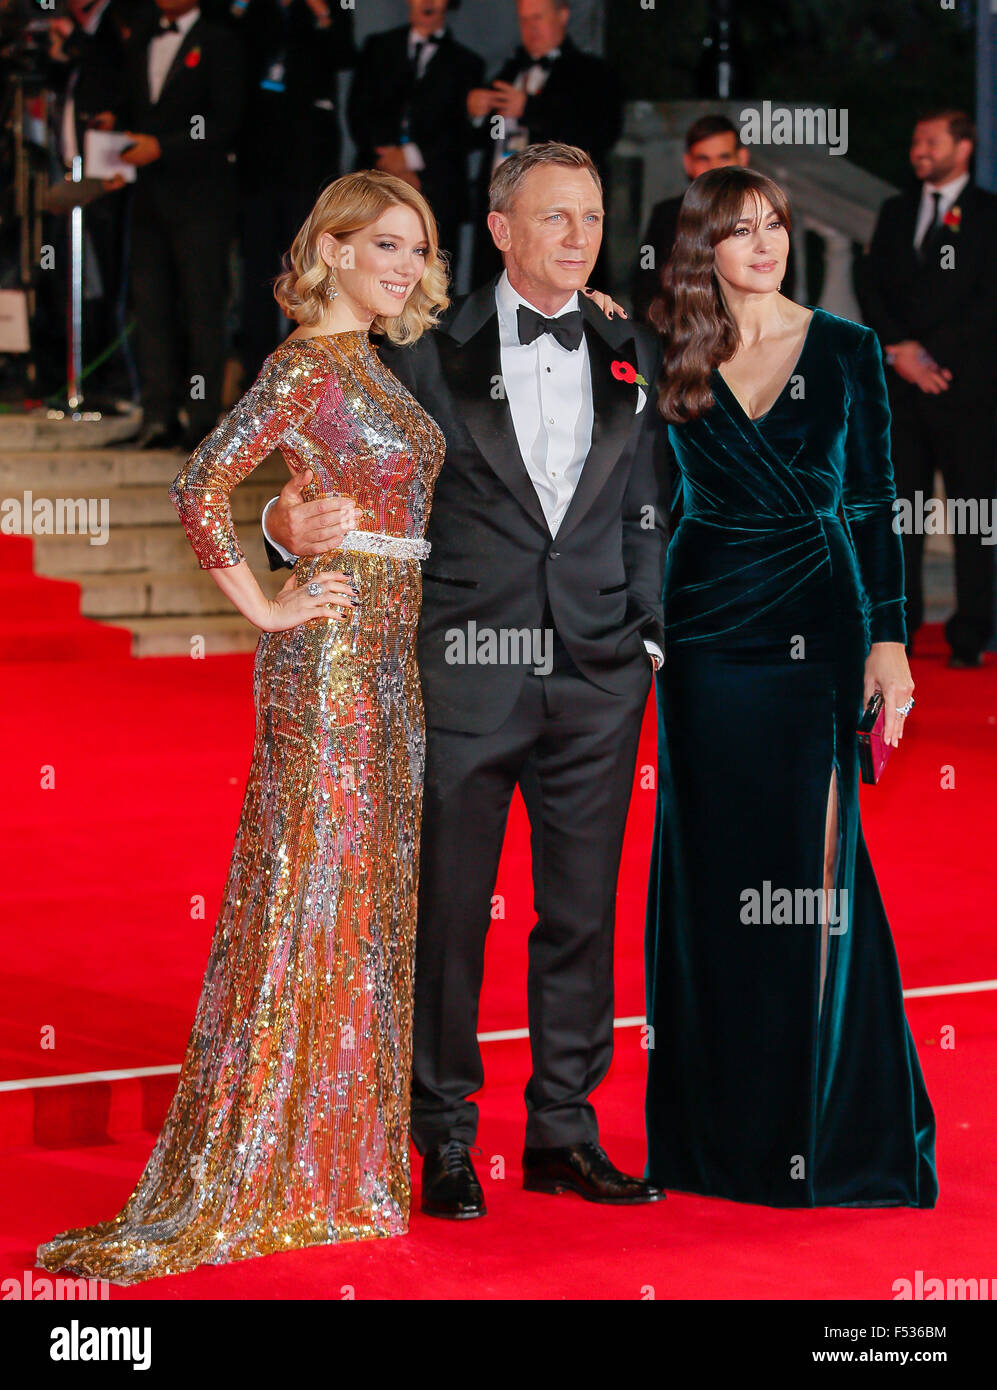 London, Britain. 26th Oct, 2015. British actor/cast member Daniel Craig (C) attends the world premiere of the new James Bond film 'Spectre' with French actress/cast member Lea Seydoux (L) and Italian actress/cast member Monica Bellucci (R) at the Royal Albert Hall in London, Britain, 26 October 2015. Spectre is the 24th official James Bond film and is released in the United Kingdom on 26 October. Photo: Hubert Boesl/dpa - NO WIRE SERVICE -/dpa/Alamy Live News Stock Photo